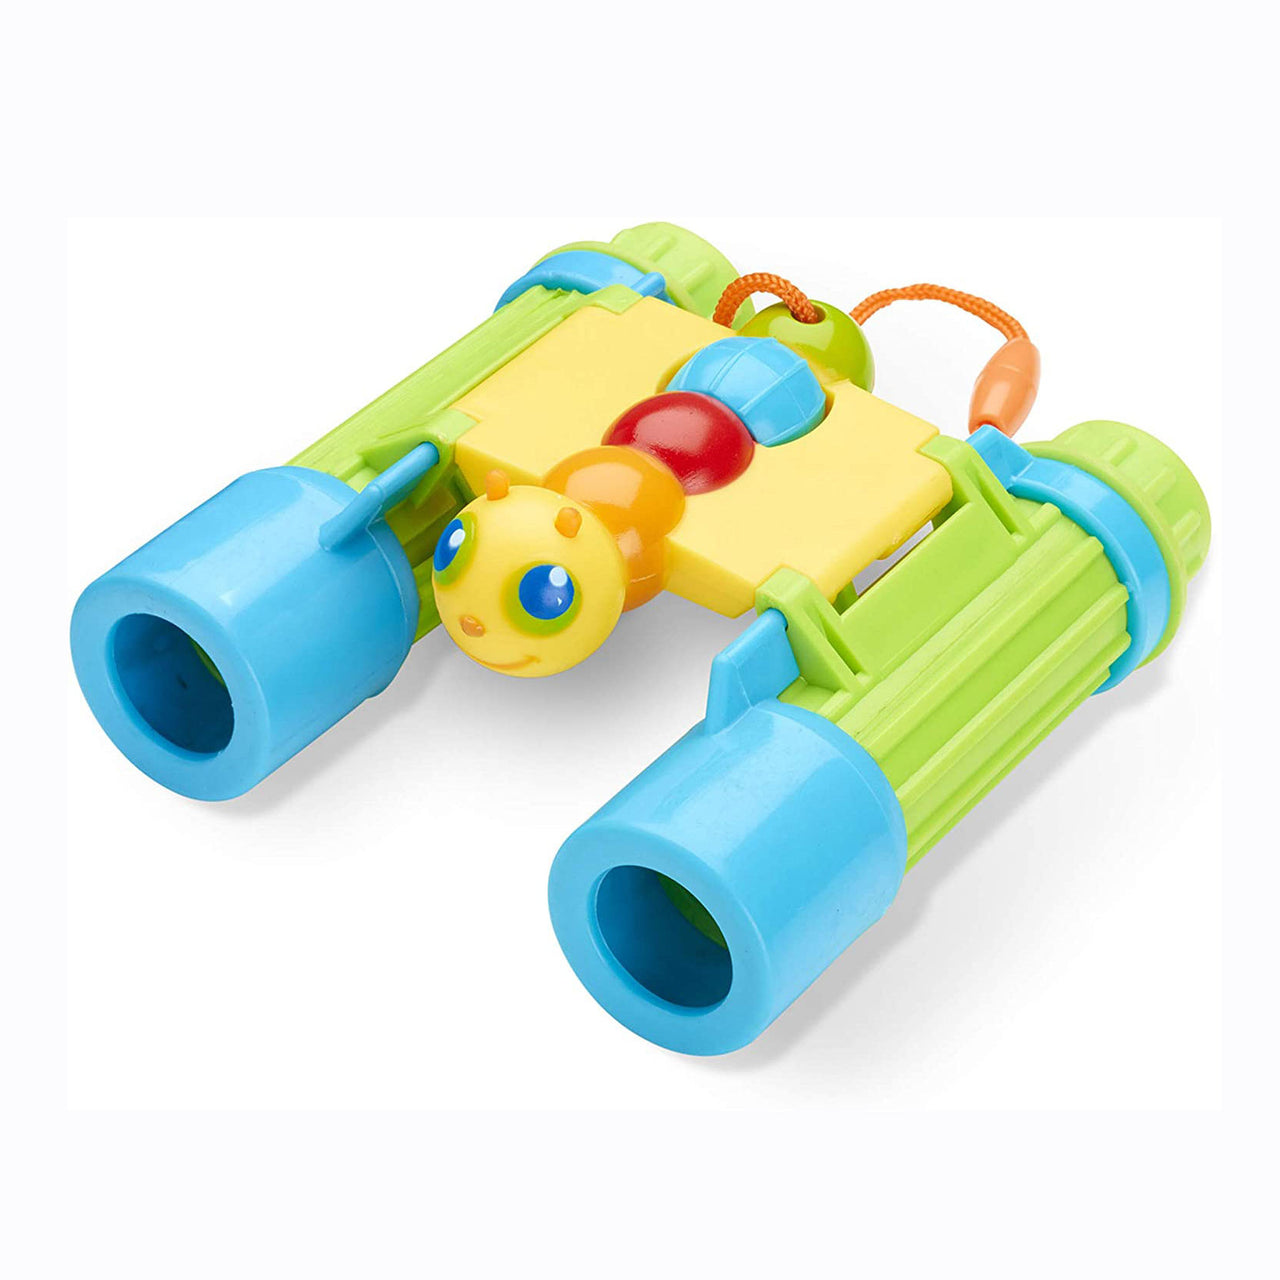 Your little ones can head outside and explore the wonderful world with these Bug binoculars from Melissa and Doug! These binoculars are a great way to get early learners closer to nature and the environment. Outdoor learning has never been so much fun! Encourages observation skills and interest in the natural world.